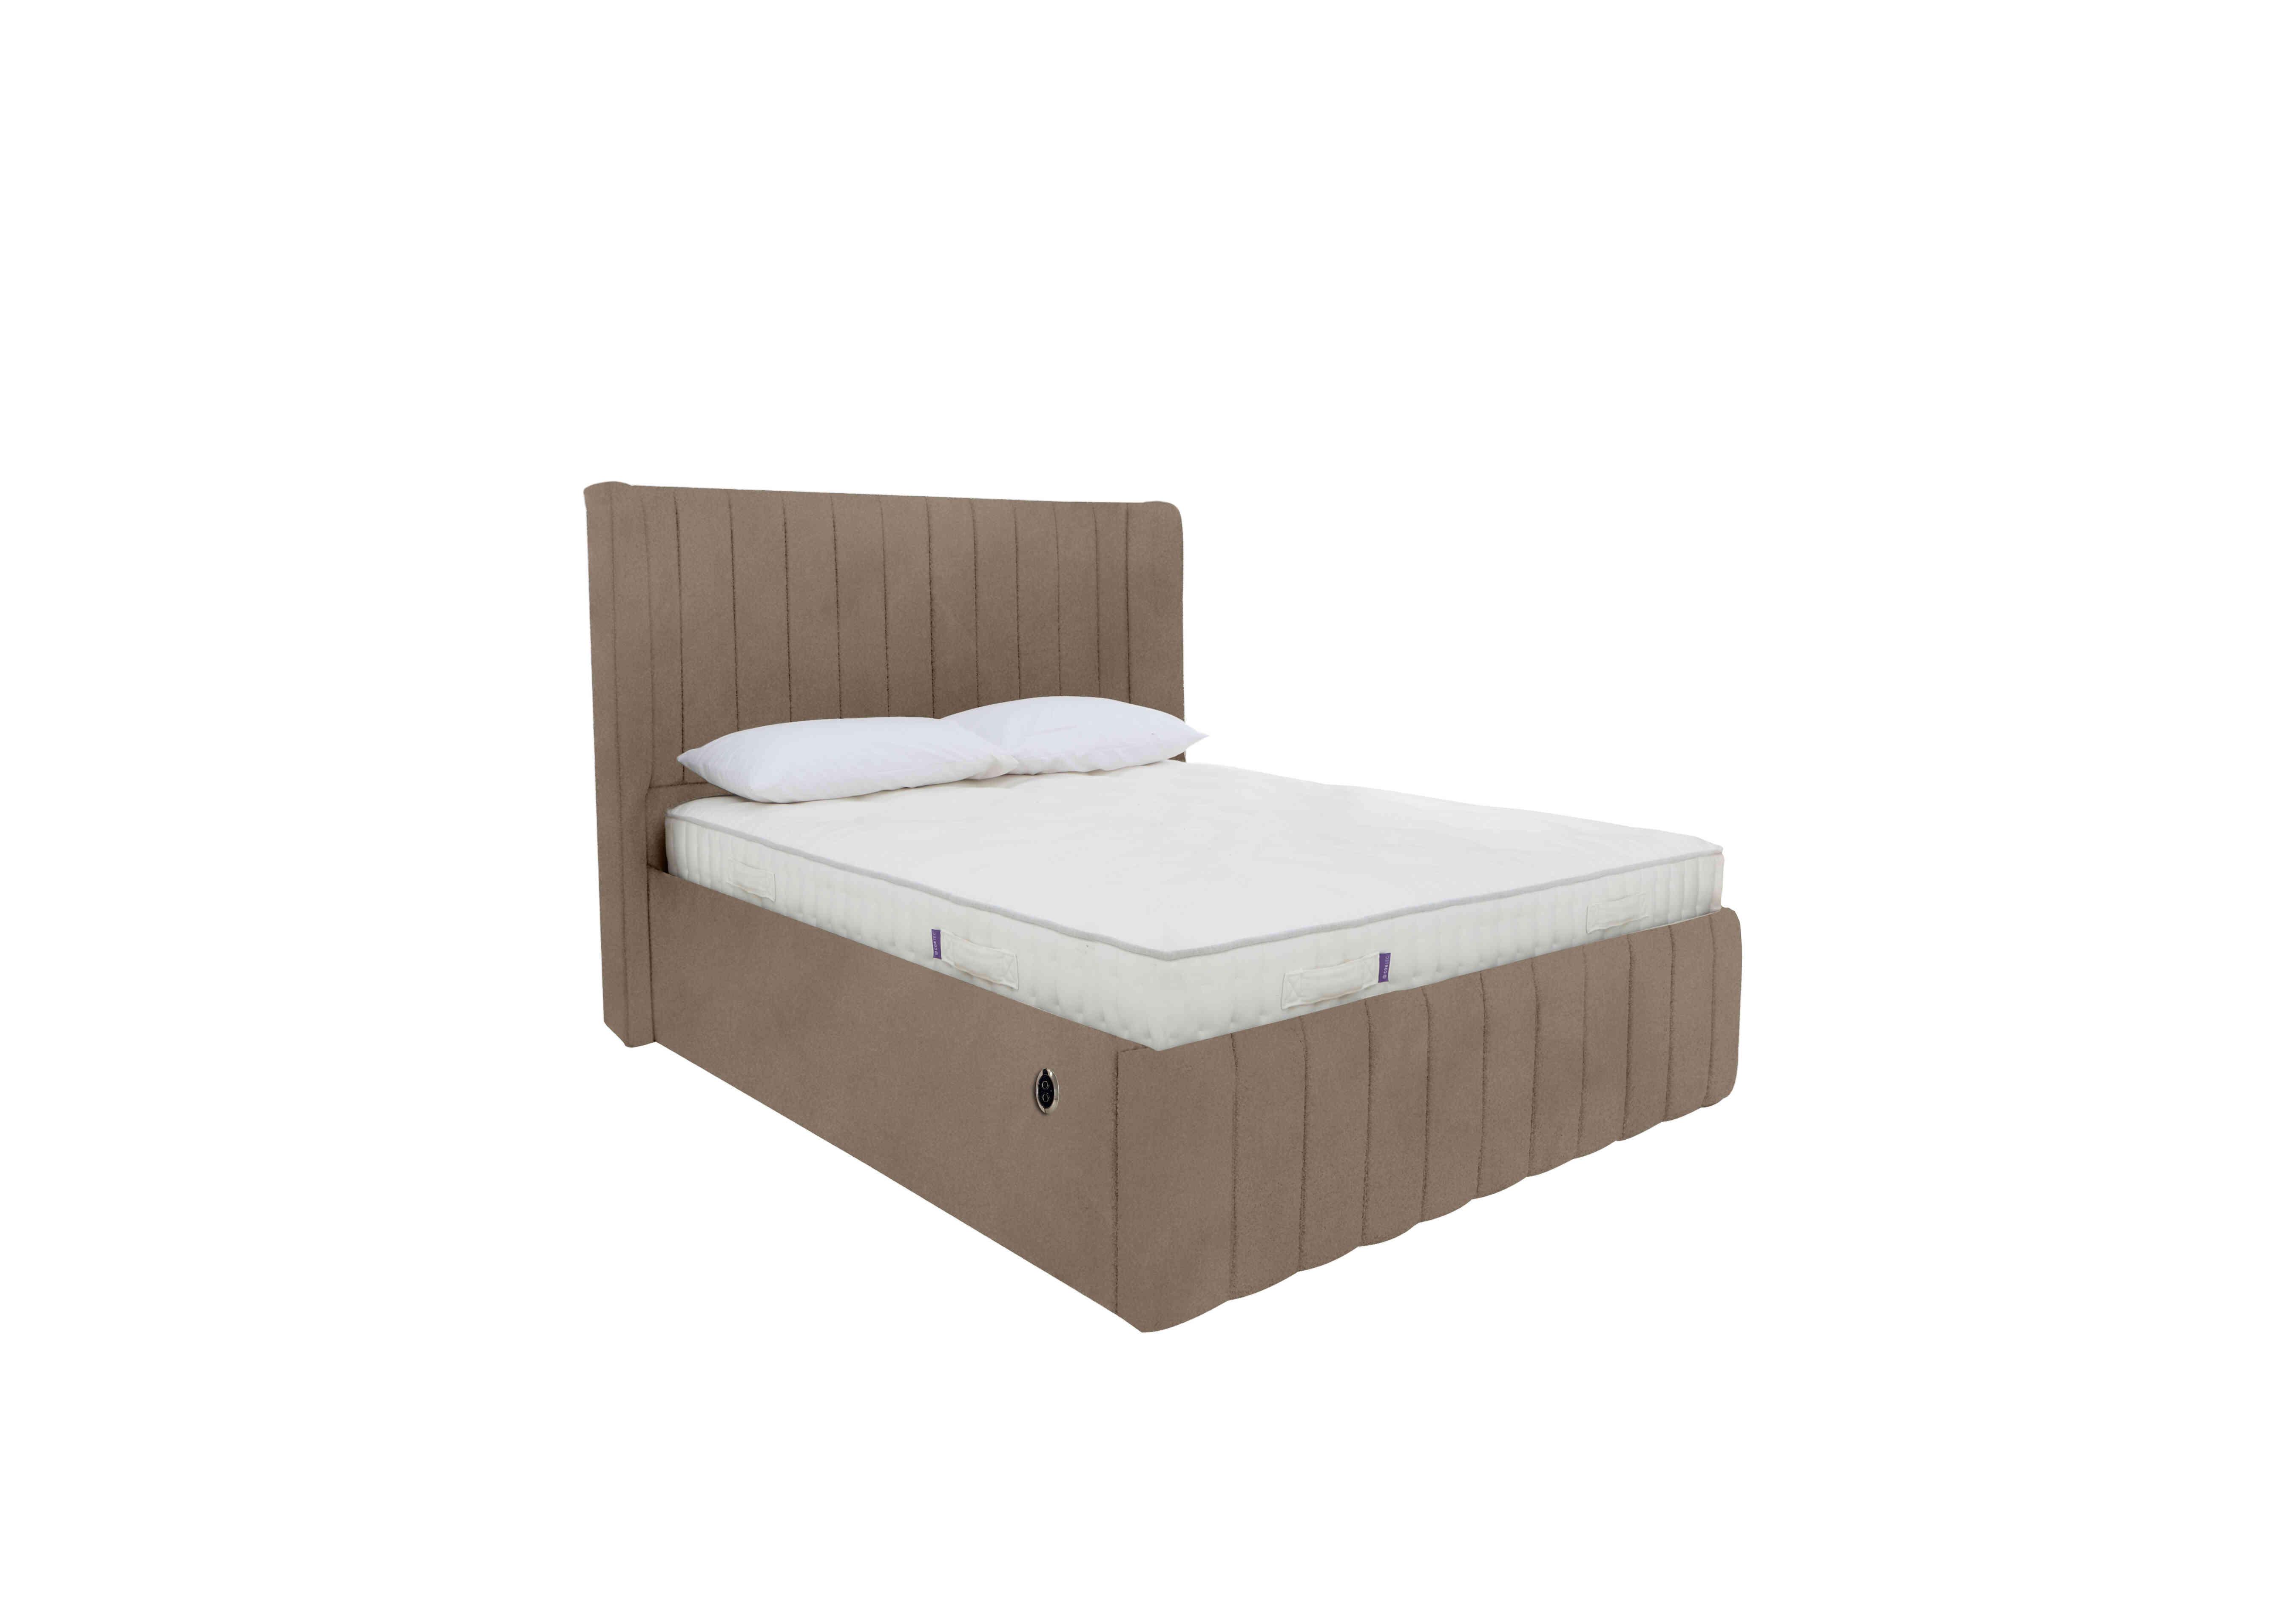 Eira Low Foot End Electric Ottoman Bed Frame in Sanderson Potters Clay on Furniture Village